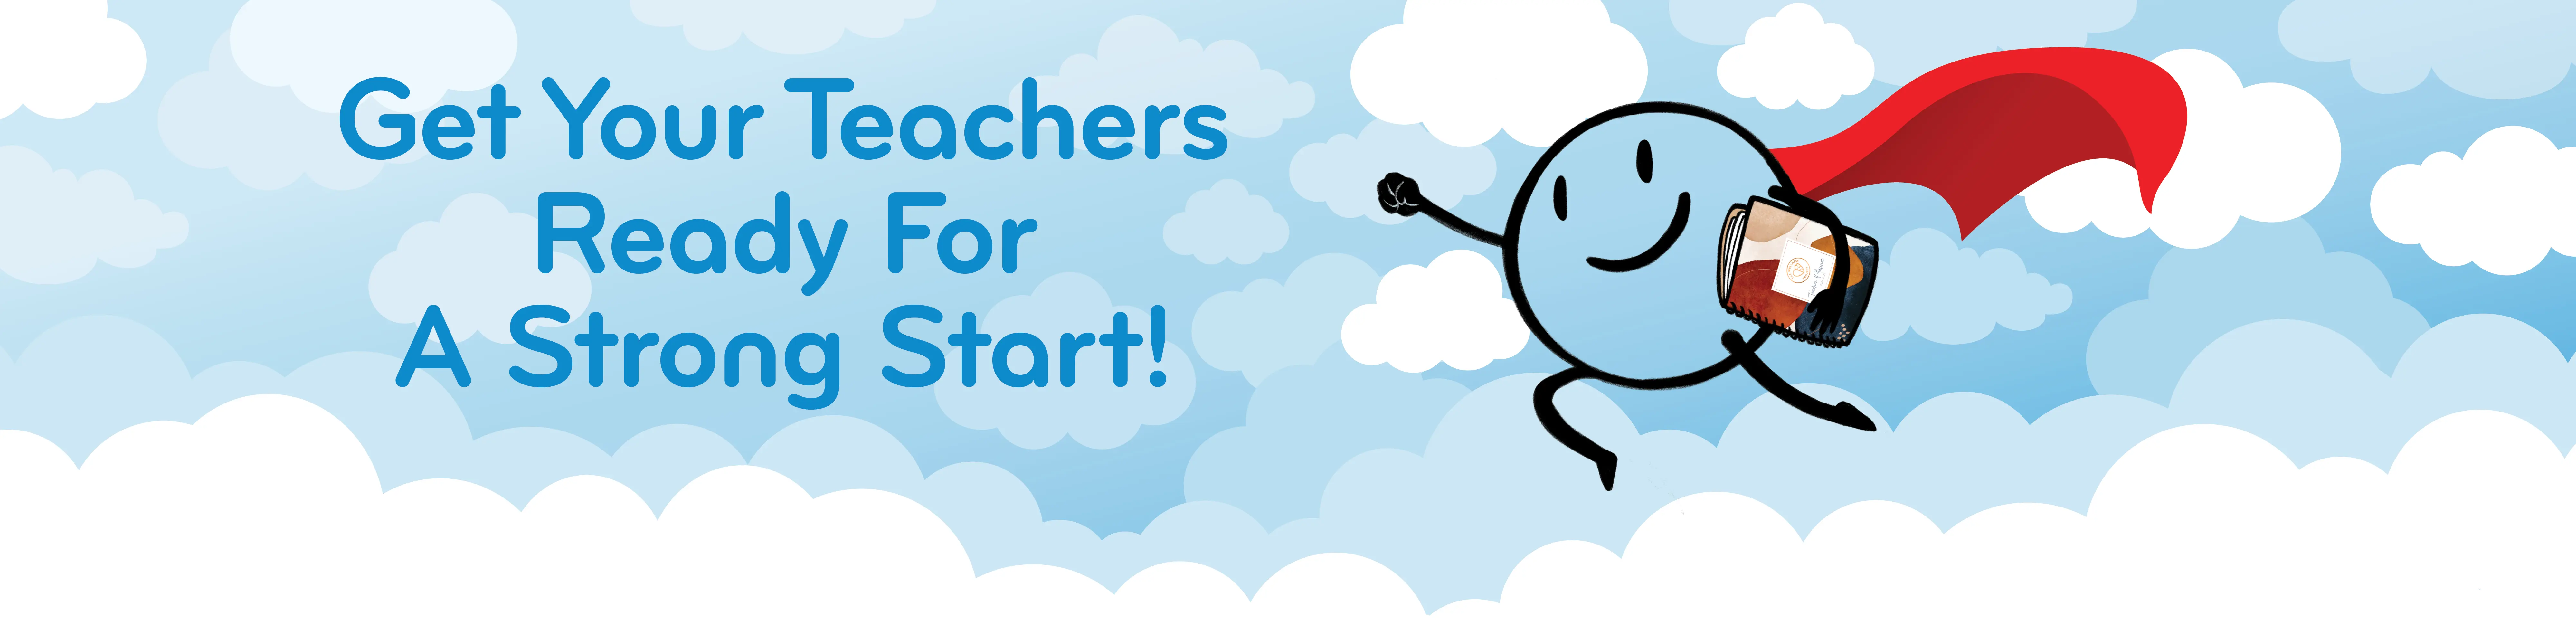 Get Your Teachers Ready For A Strong Start!